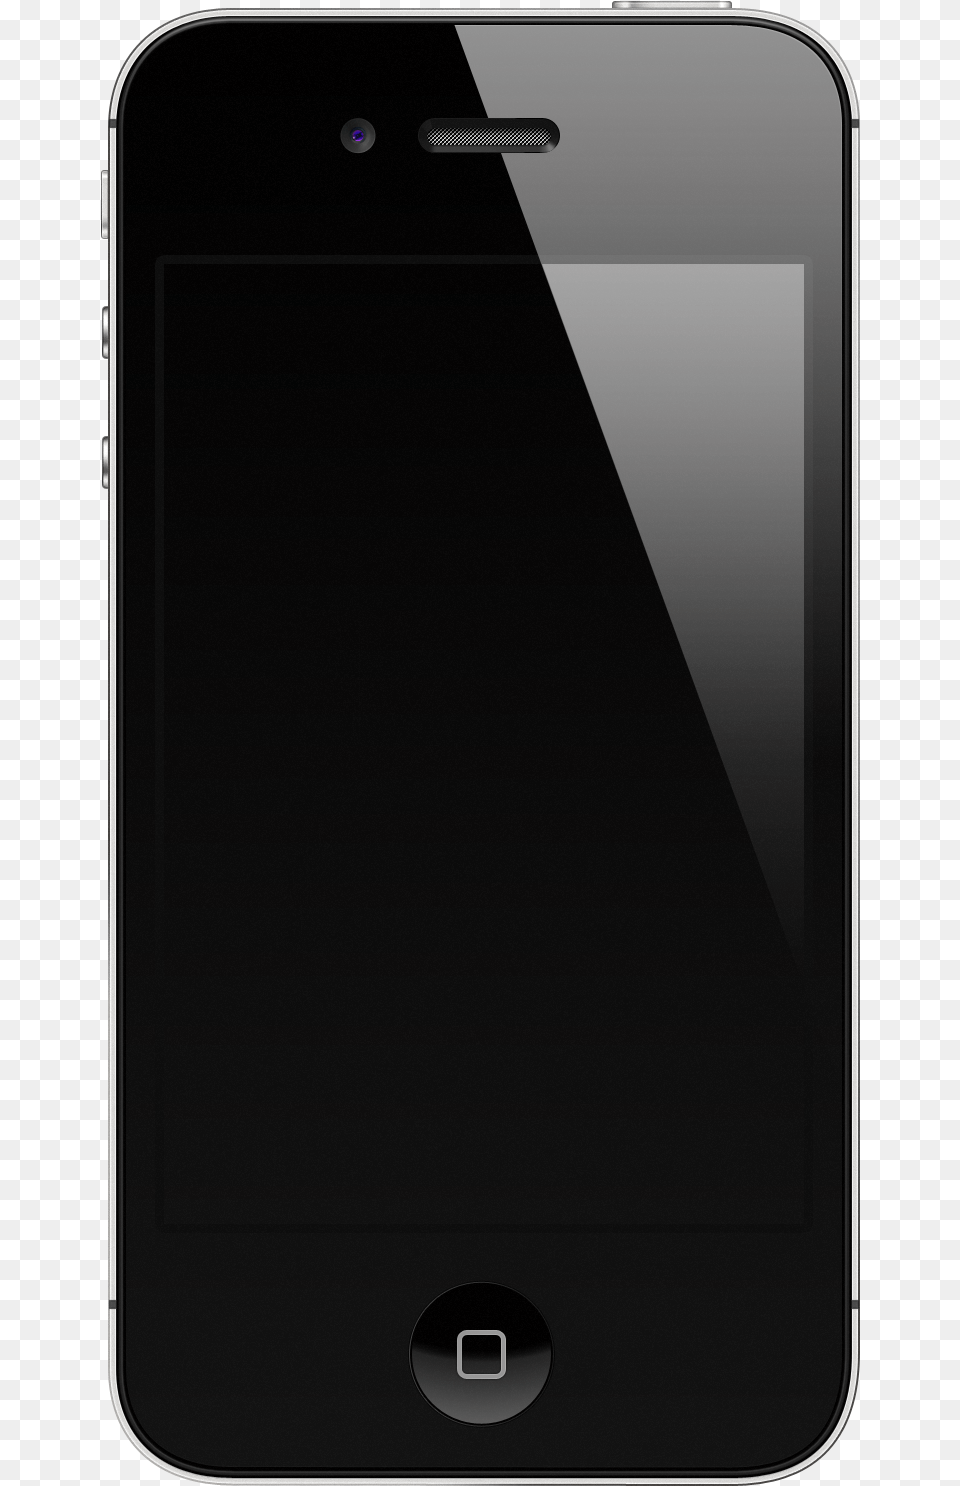 Blank Iphone Screen Transparent U0026 Clipart Free Download Phones With A Black Screen, Electronics, Mobile Phone, Phone Png Image